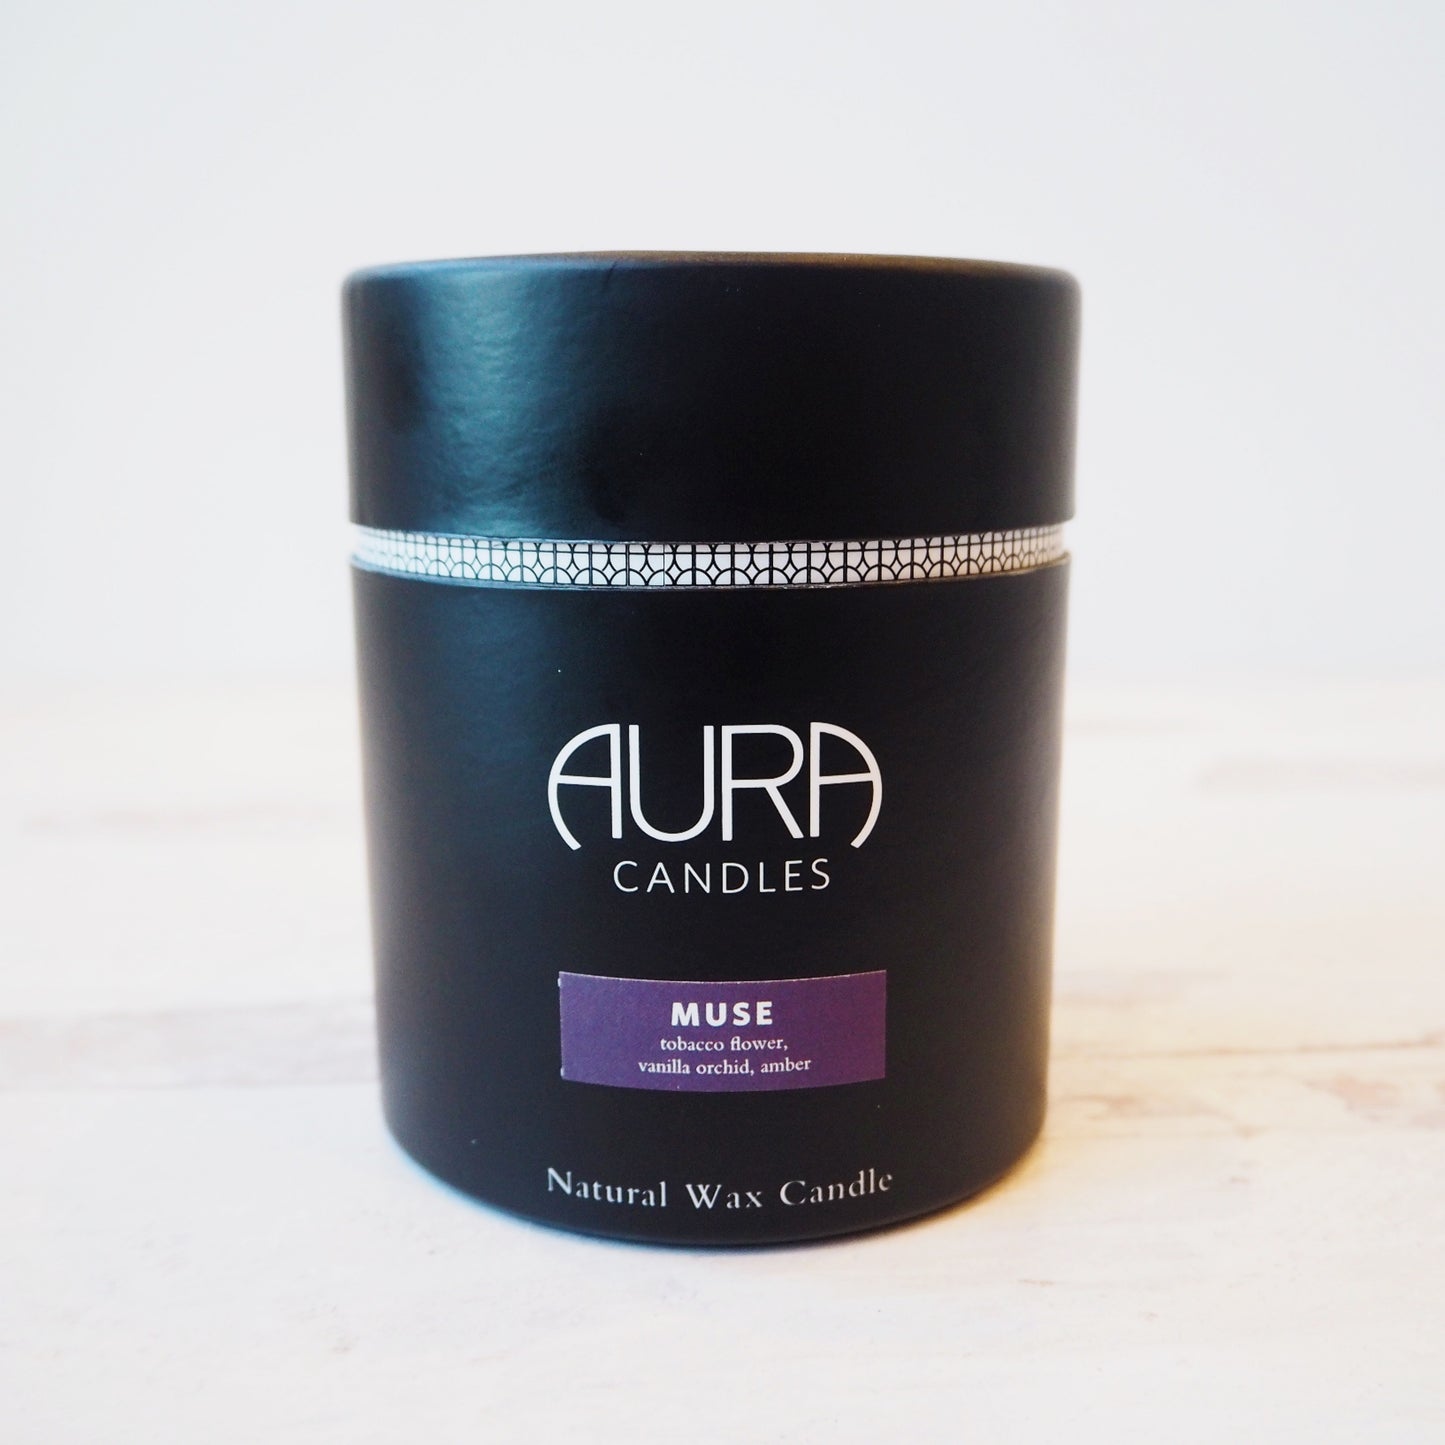 Aura Muse Scented Candle